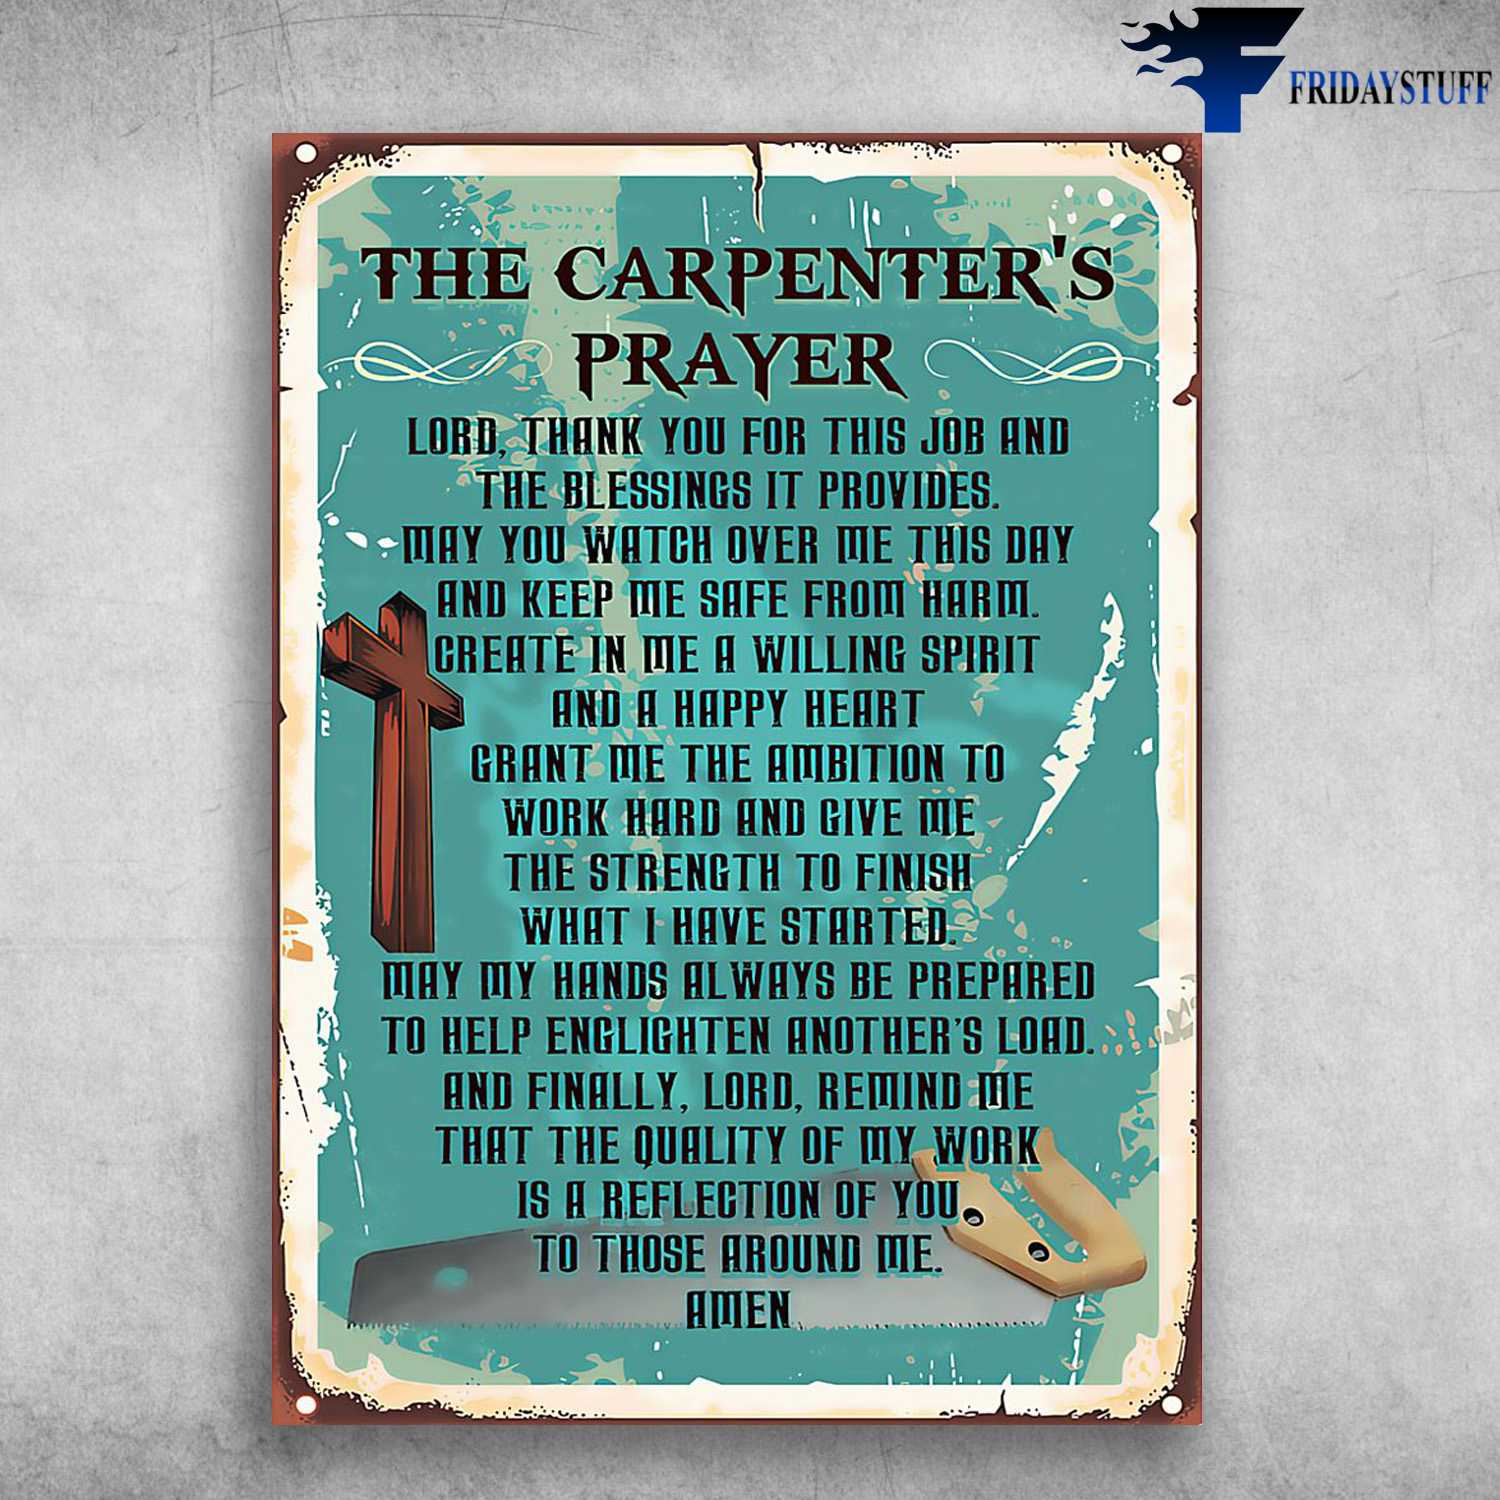 Carpenter Poster - The Carpenter's Prayer, Lord, Thank You For This Job, And The Blessings It Provides, May You Watch Over Me This Day, And Keep Me Safe From Harm